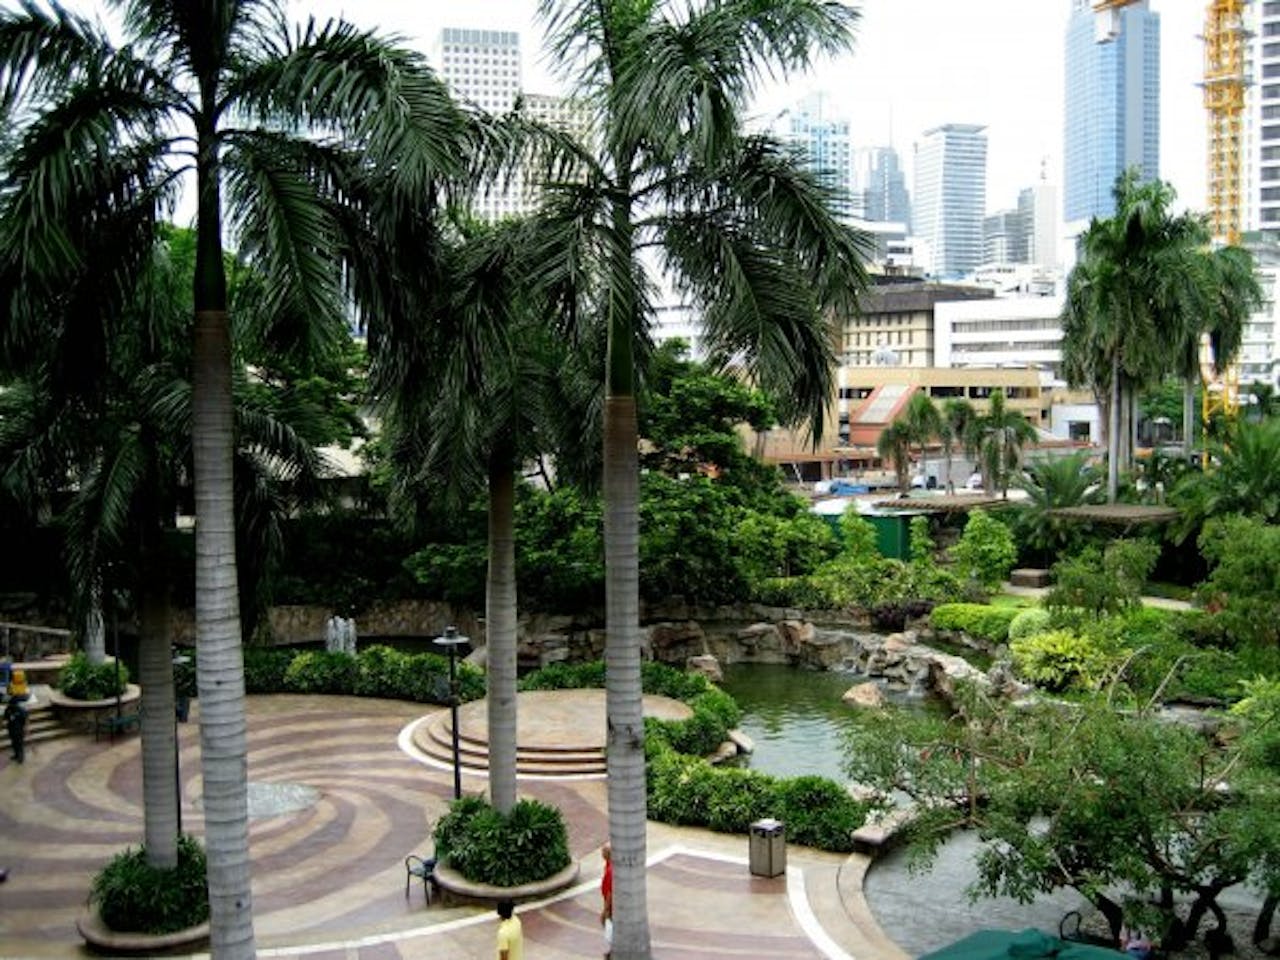 The rise of a new Makati through Ayala Land initiative, News, Eco-Business